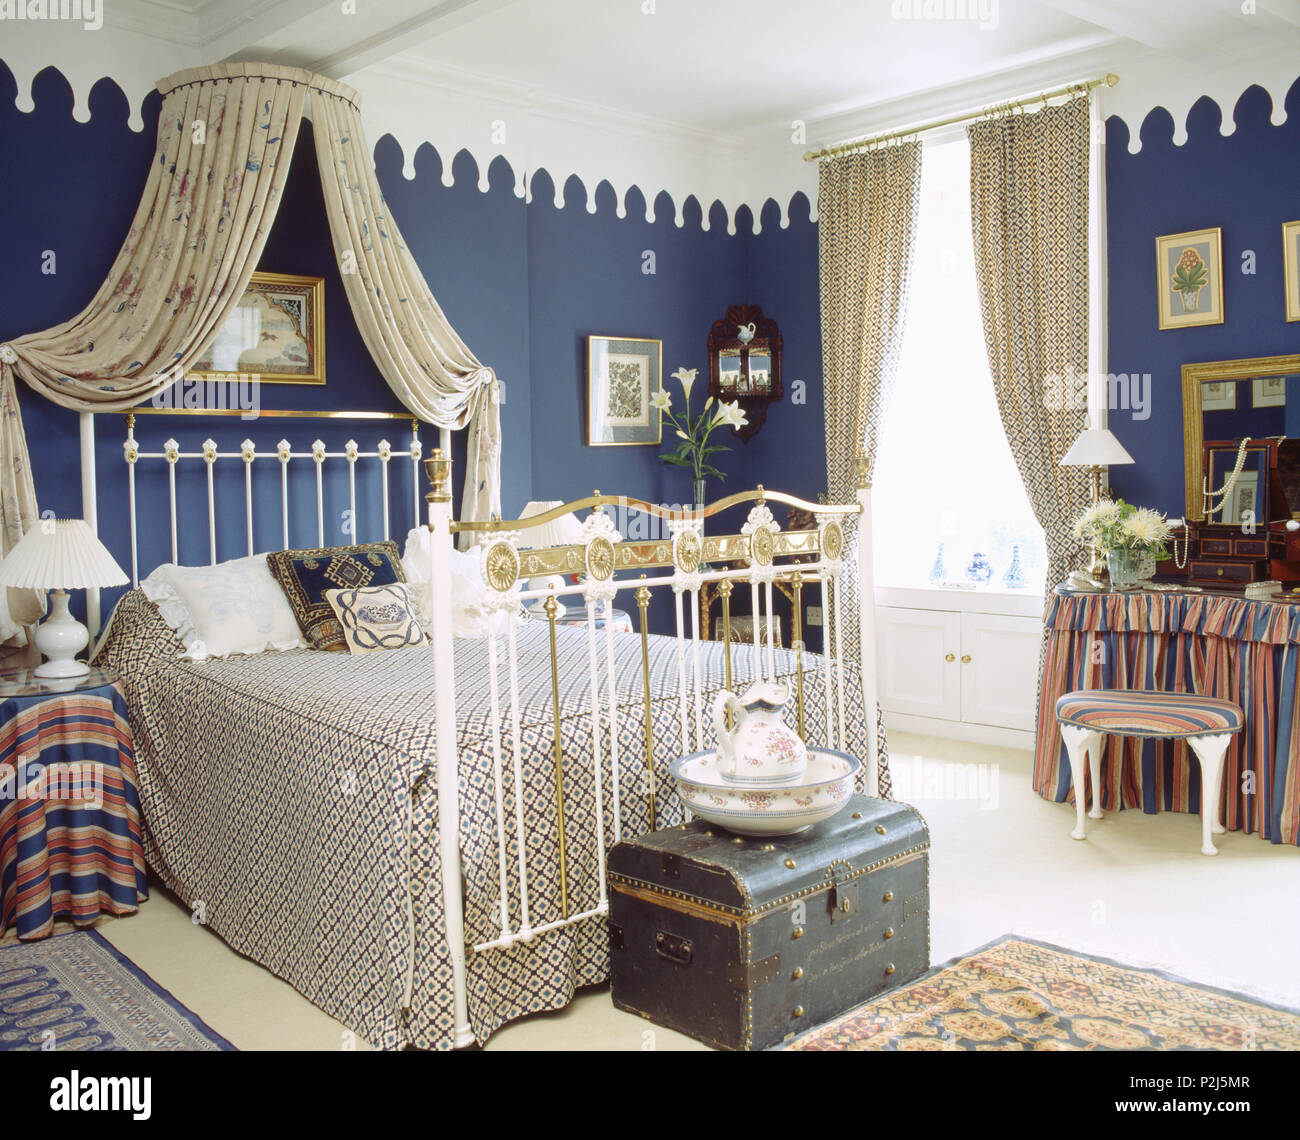 Gothic Style Cornice In Blue Bedroom With White Ceiling And